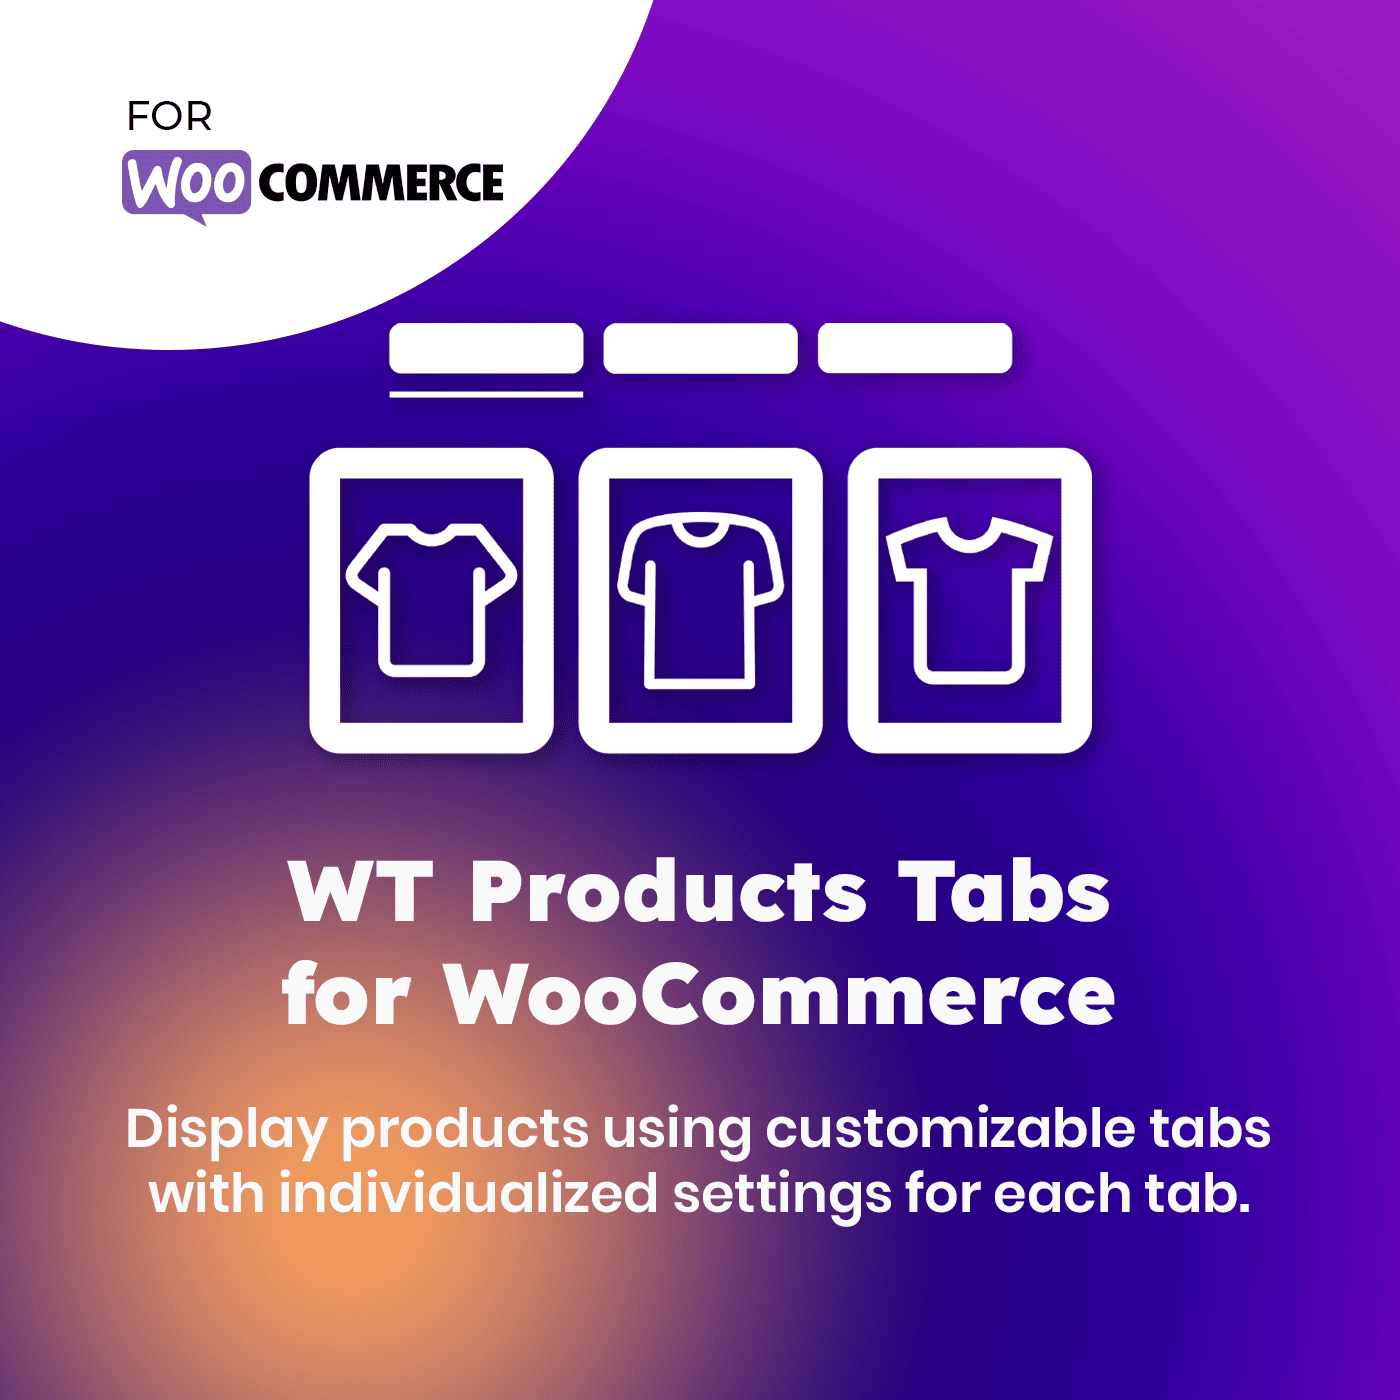 WT Products Tabs for WooCommerce - WooCommerce Theme